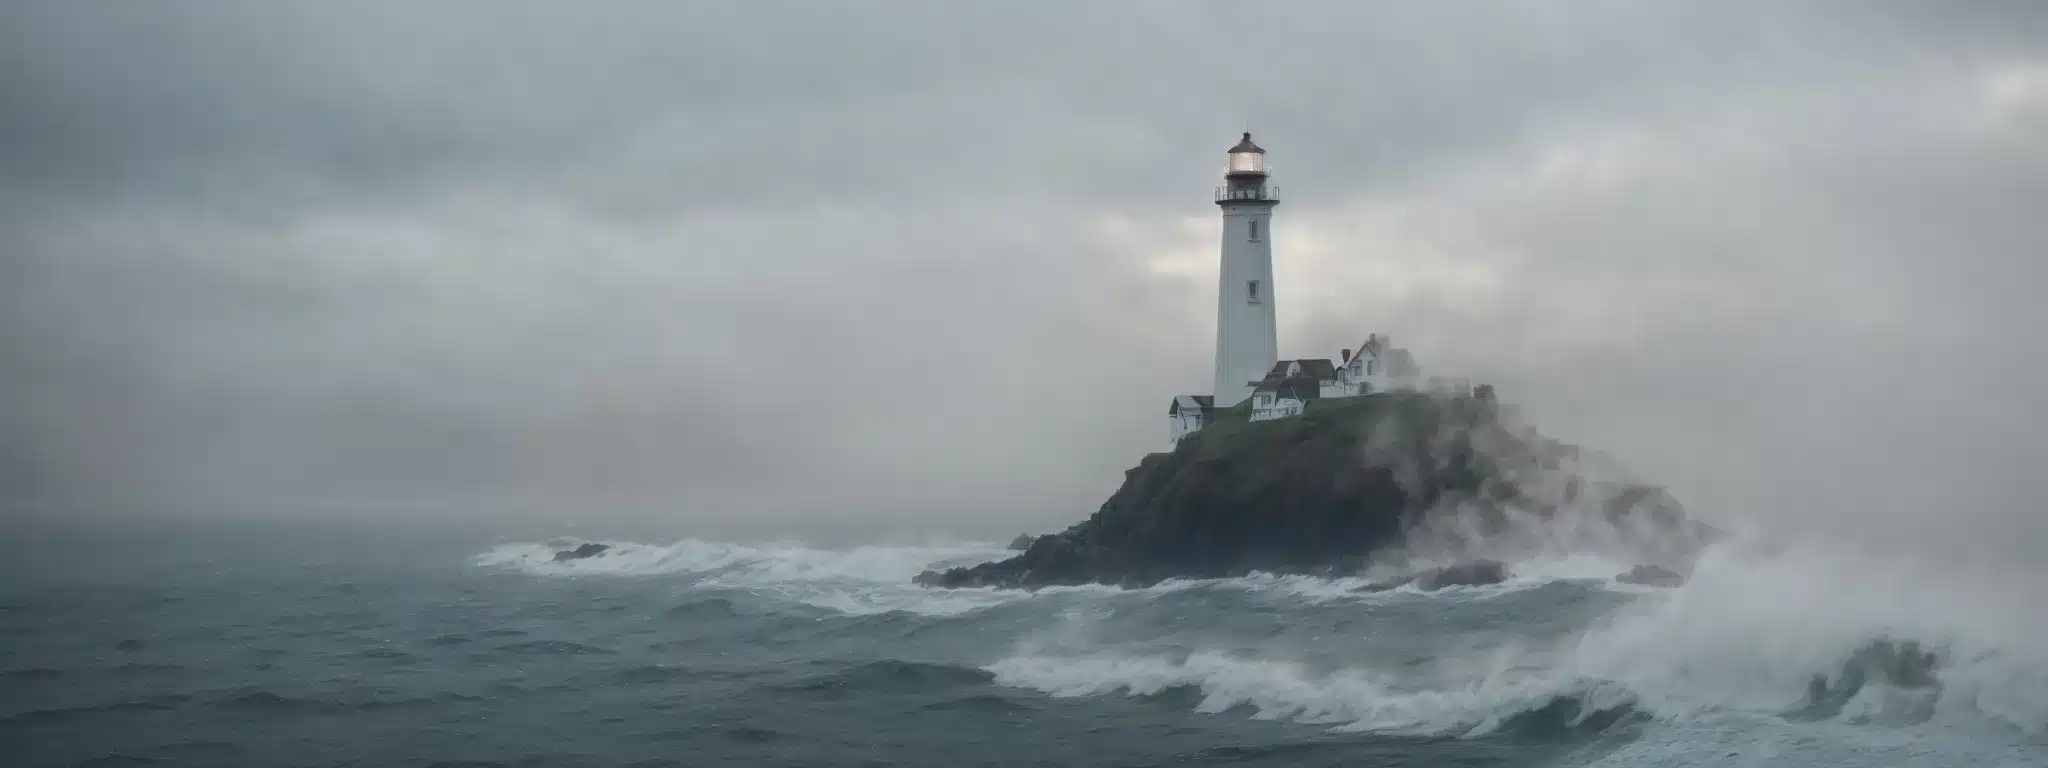 A Lighthouse Stands Steadfast On The Coastline, Its Light Cutting Through The Mist, Symbolizing A Brand'S Guiding Presence Amidst The Ever-Changing Market Currents.